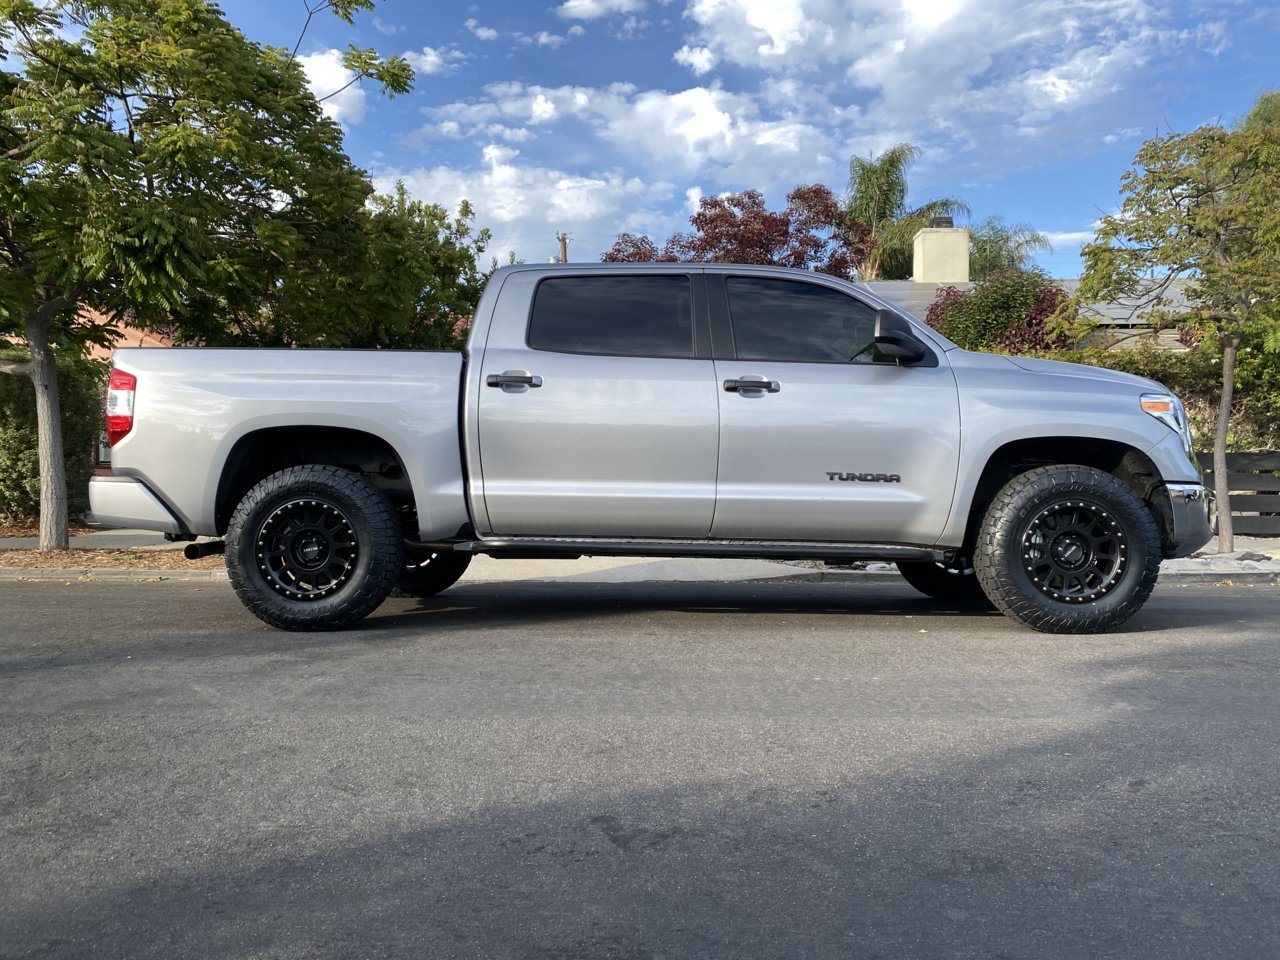 New Tires/Wheels on Stock Limited | Toyota Tundra Forum